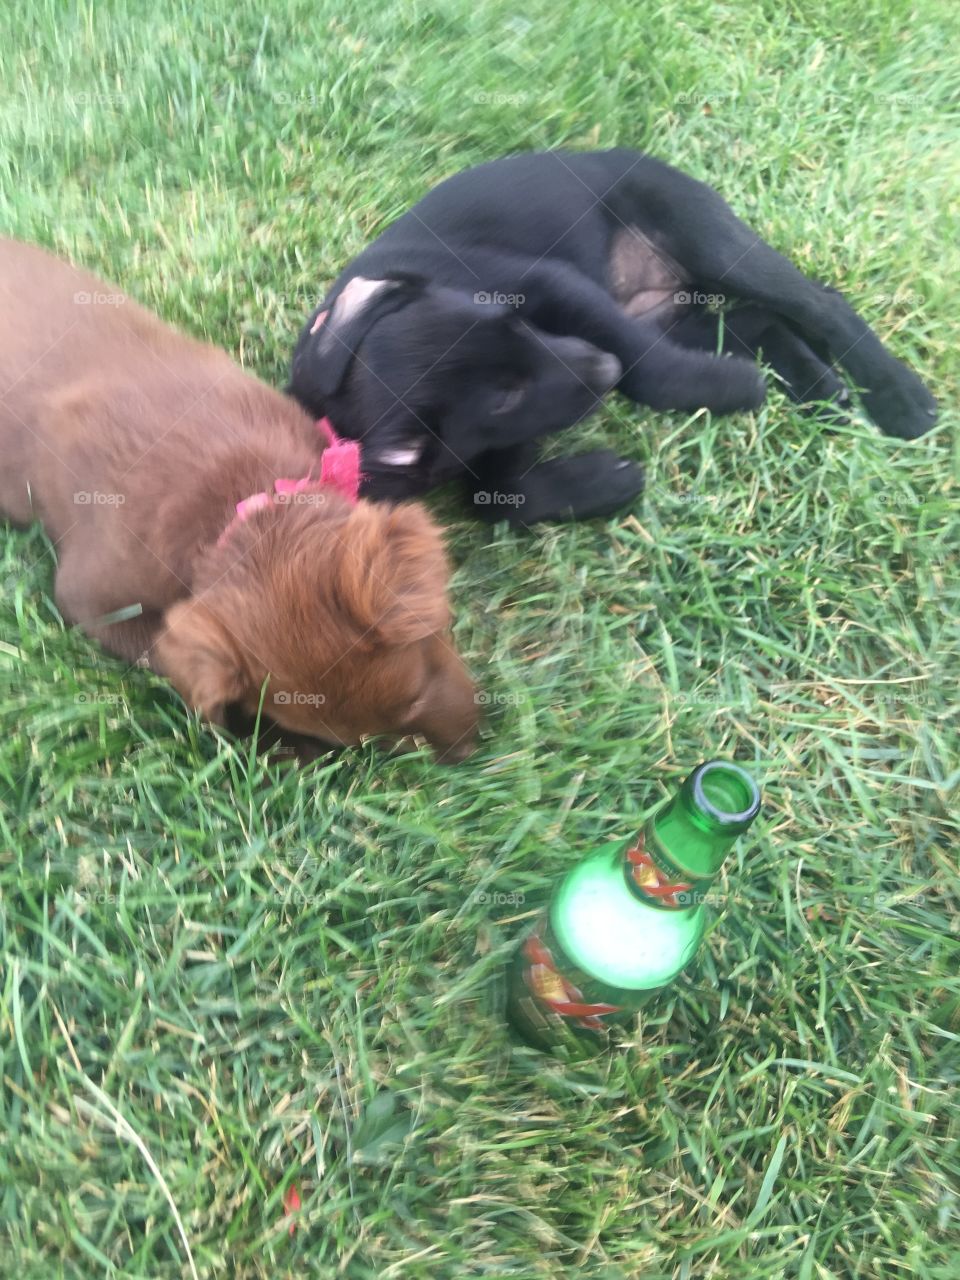 Dogs sleeping with beer